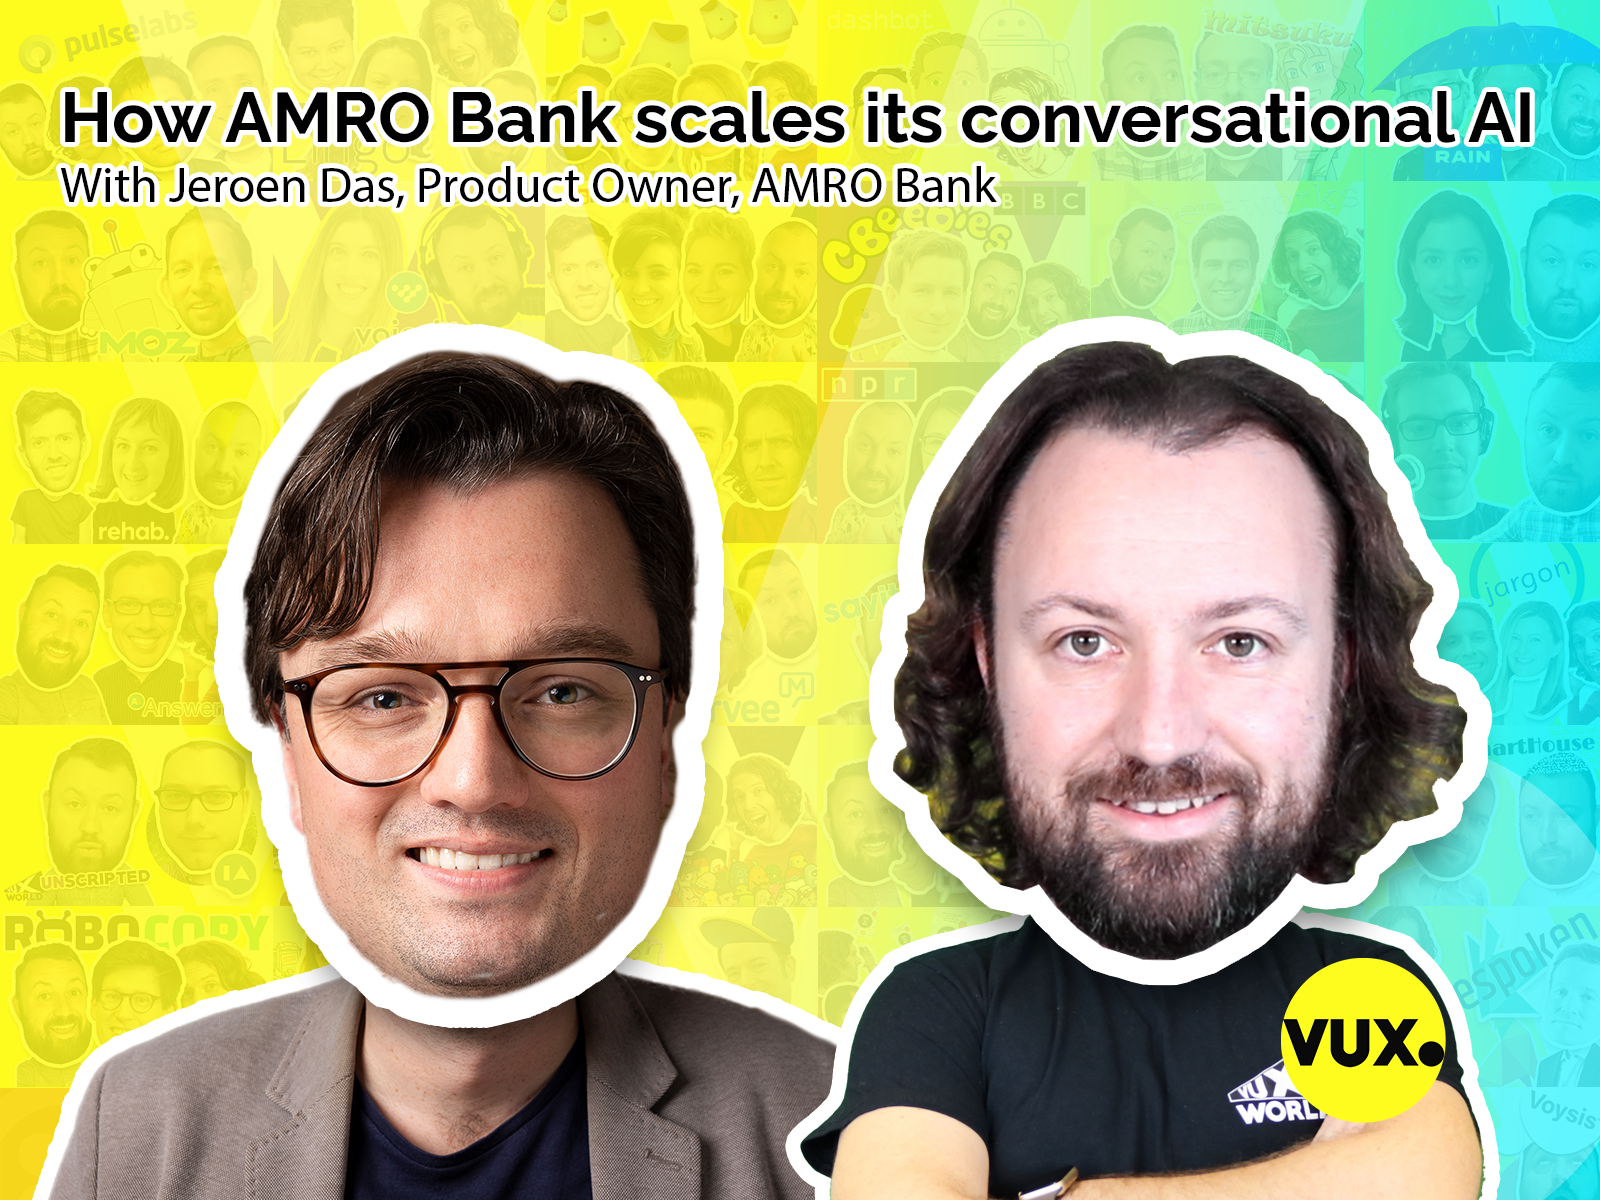 How ABN AMRO Bank scales its conversational AI, with Jeroen